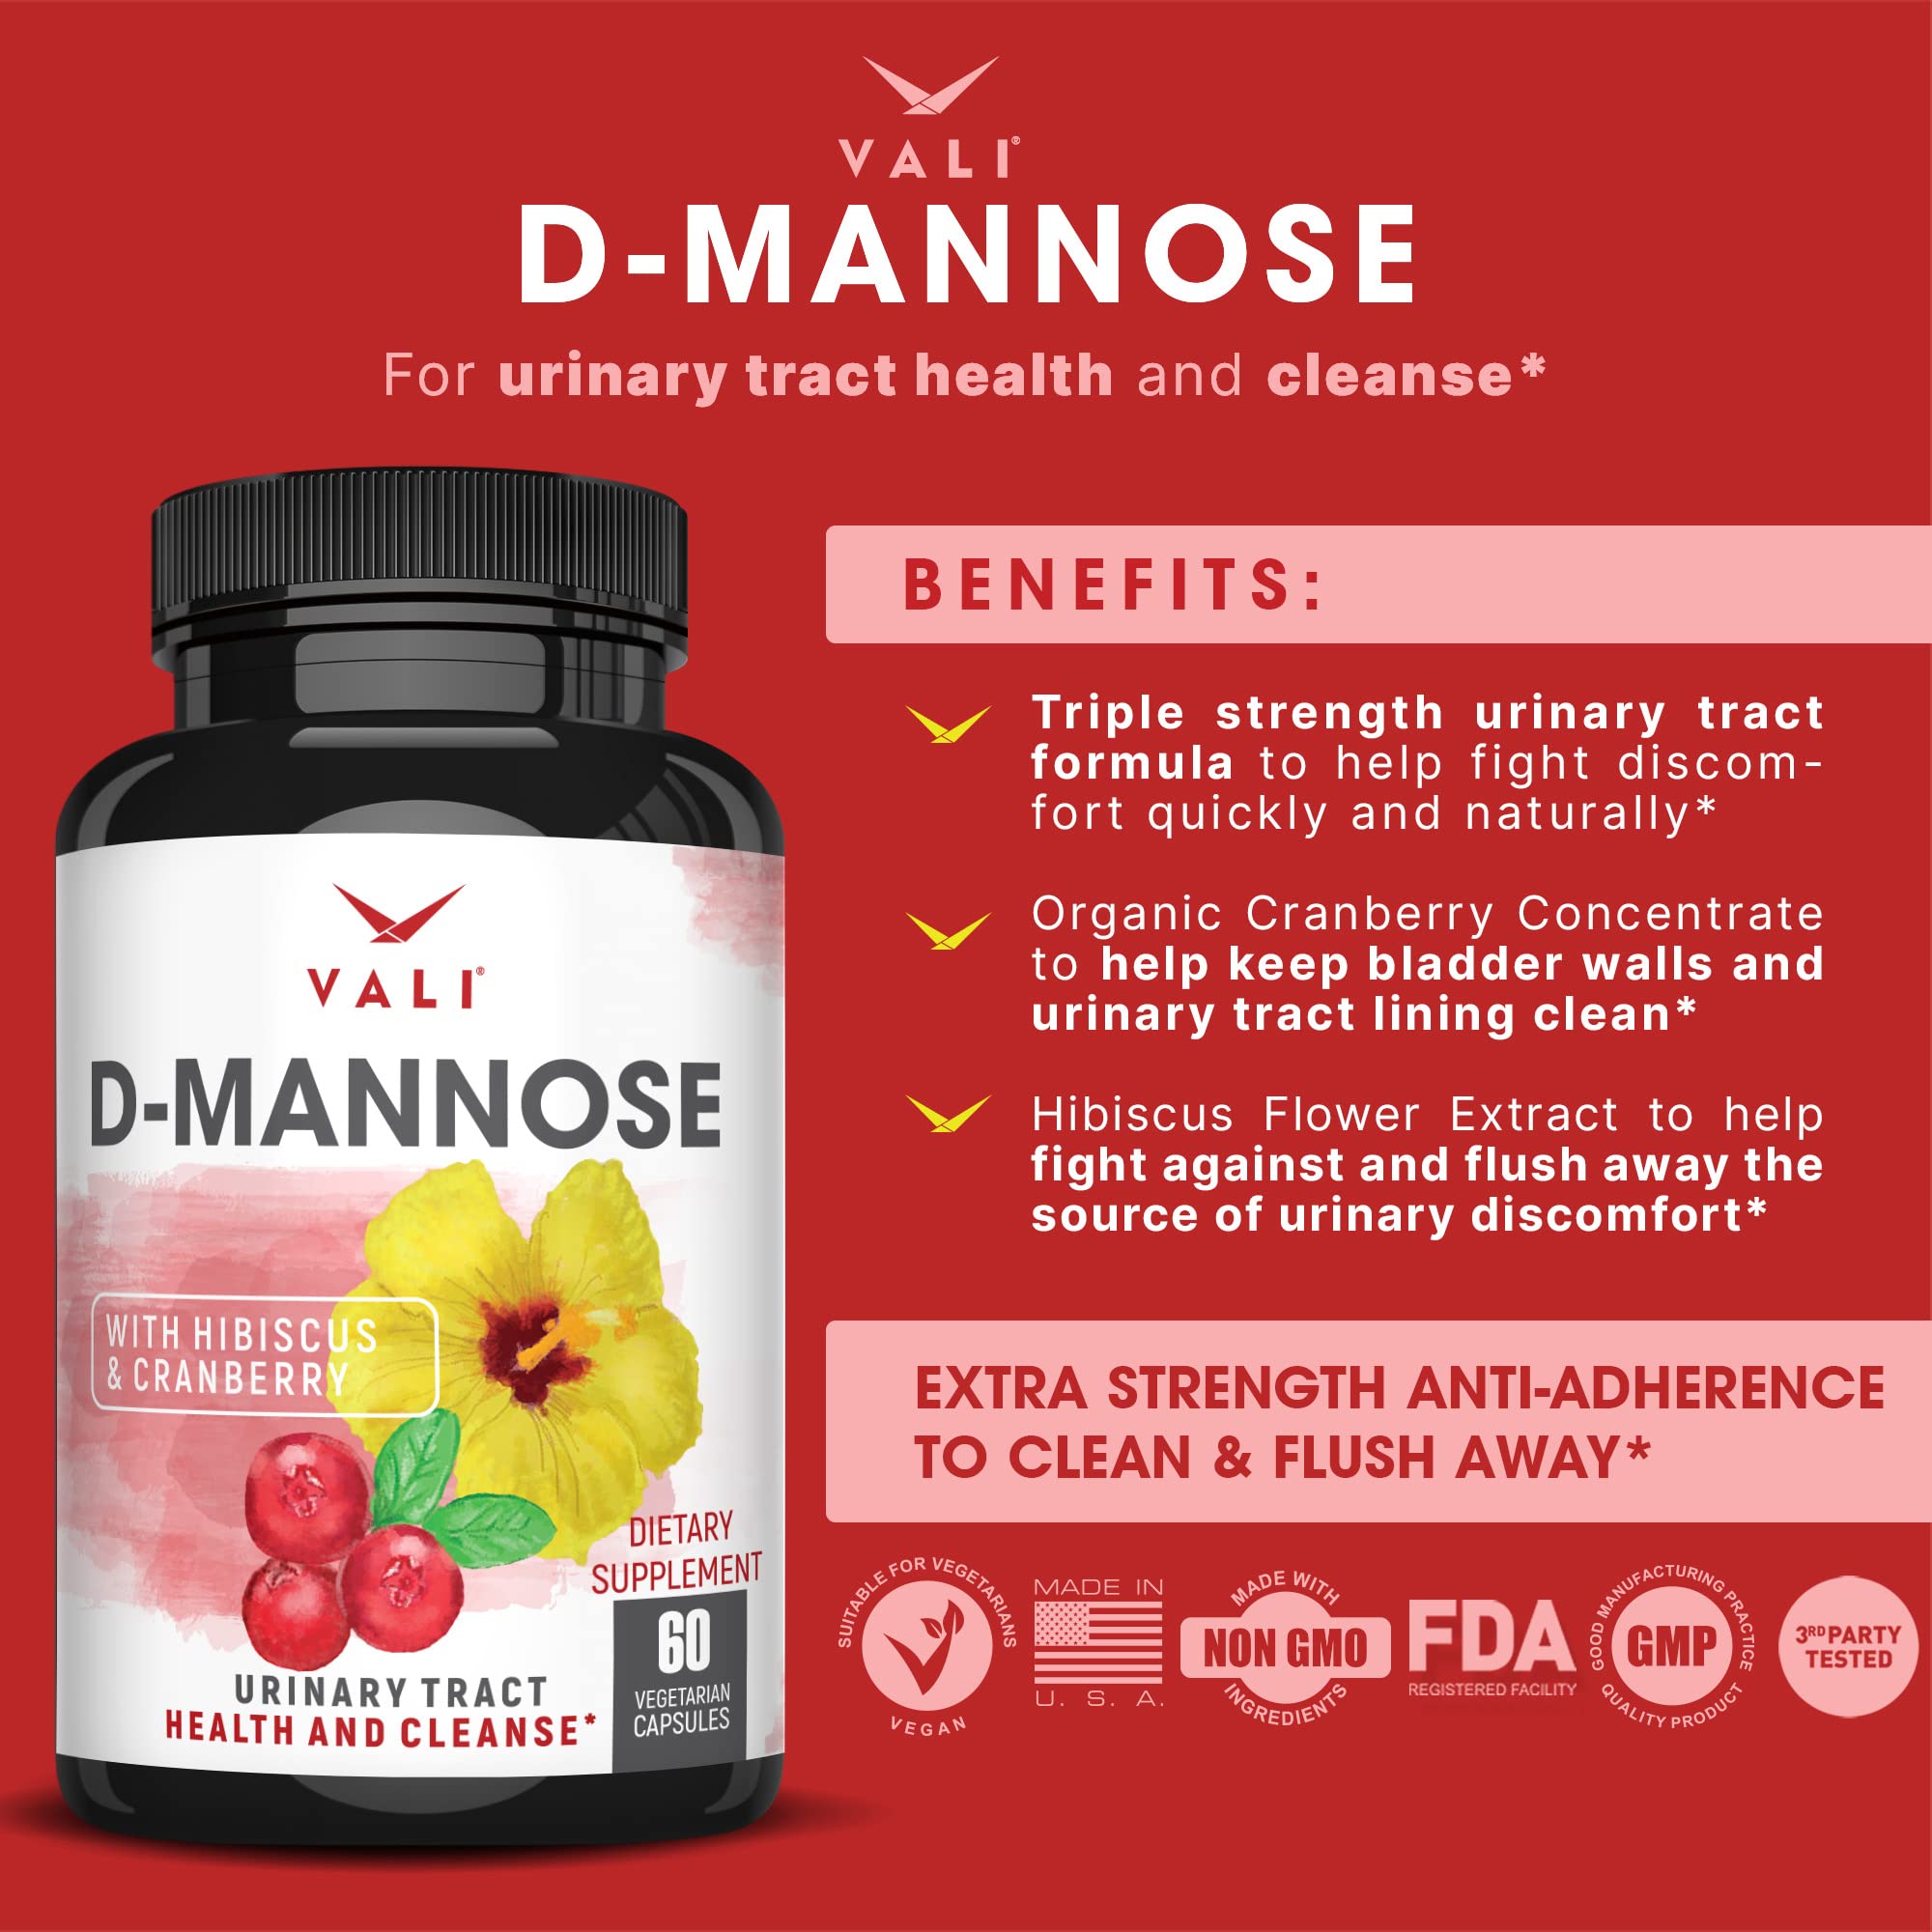 VALI D-Mannose & VALI Tart Cherry Bundle - Urinary Tract Health and Cleanse with D-Mannose, Cranberry & Hibiscus. Uric Acid Control and Cleanse with Cherry, Celery & Bilberry for Joint Muscle Support